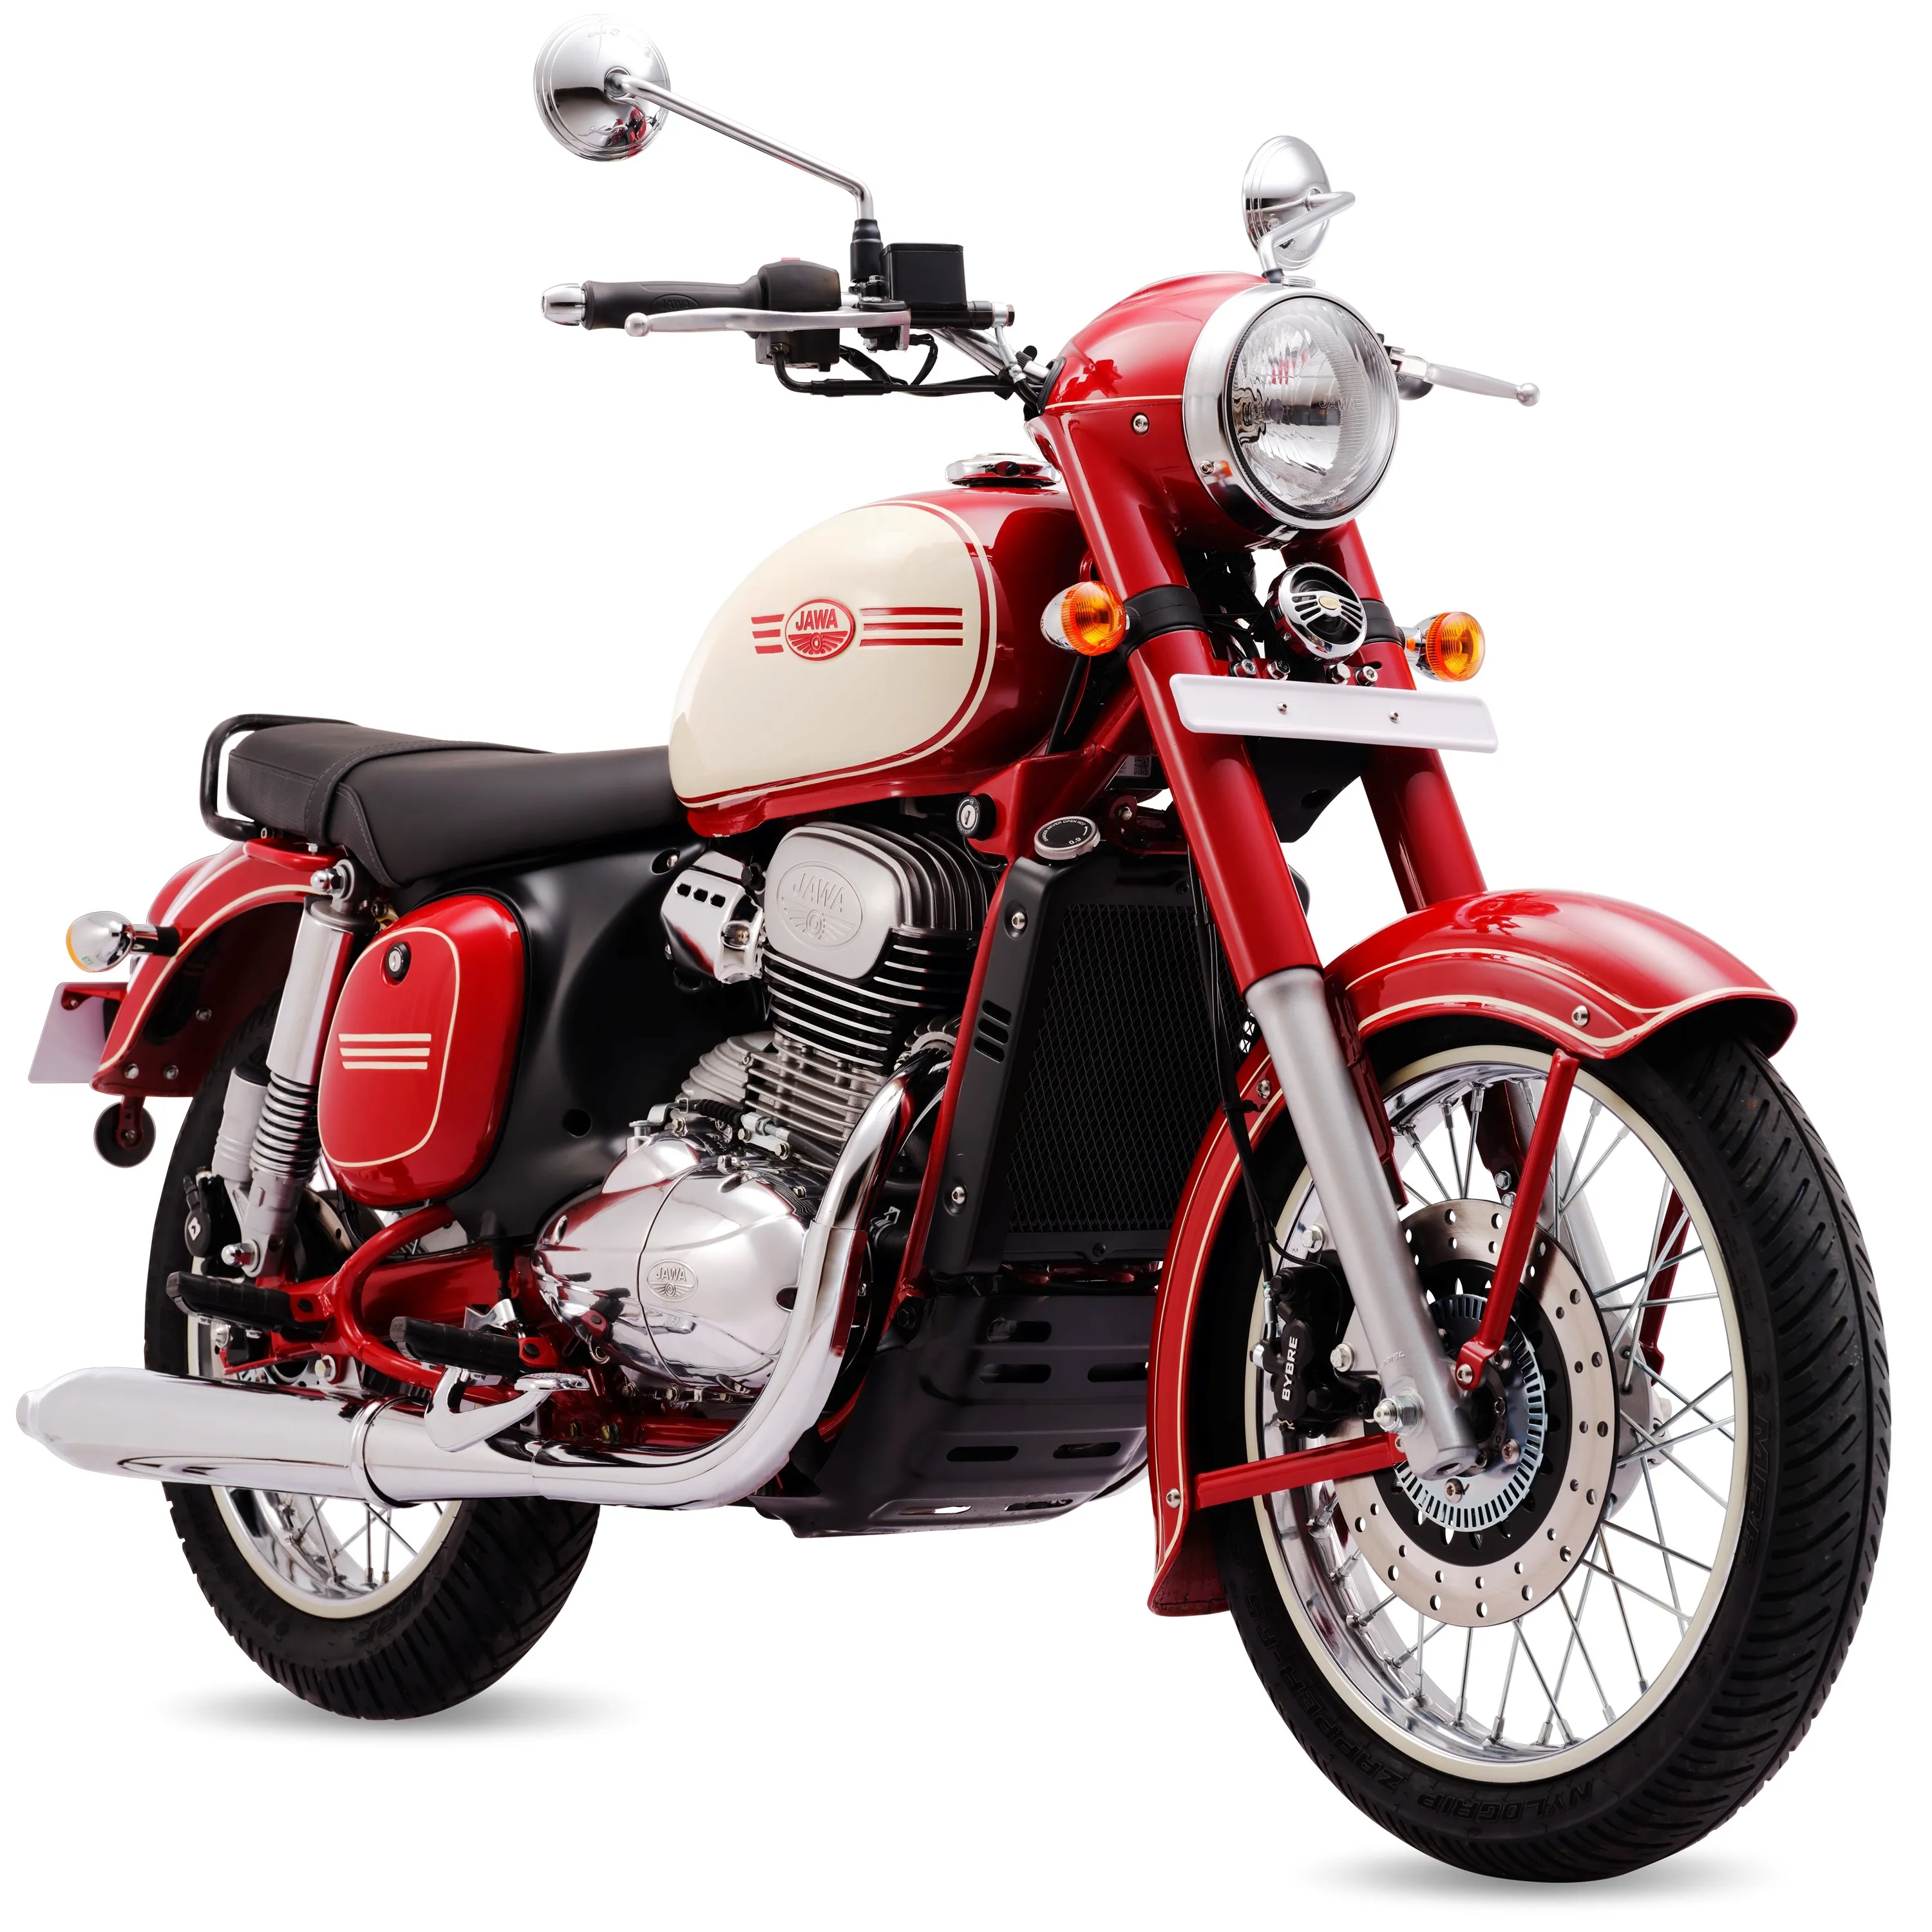 Classic Legends Jawa Perak To Launch In India On November 15